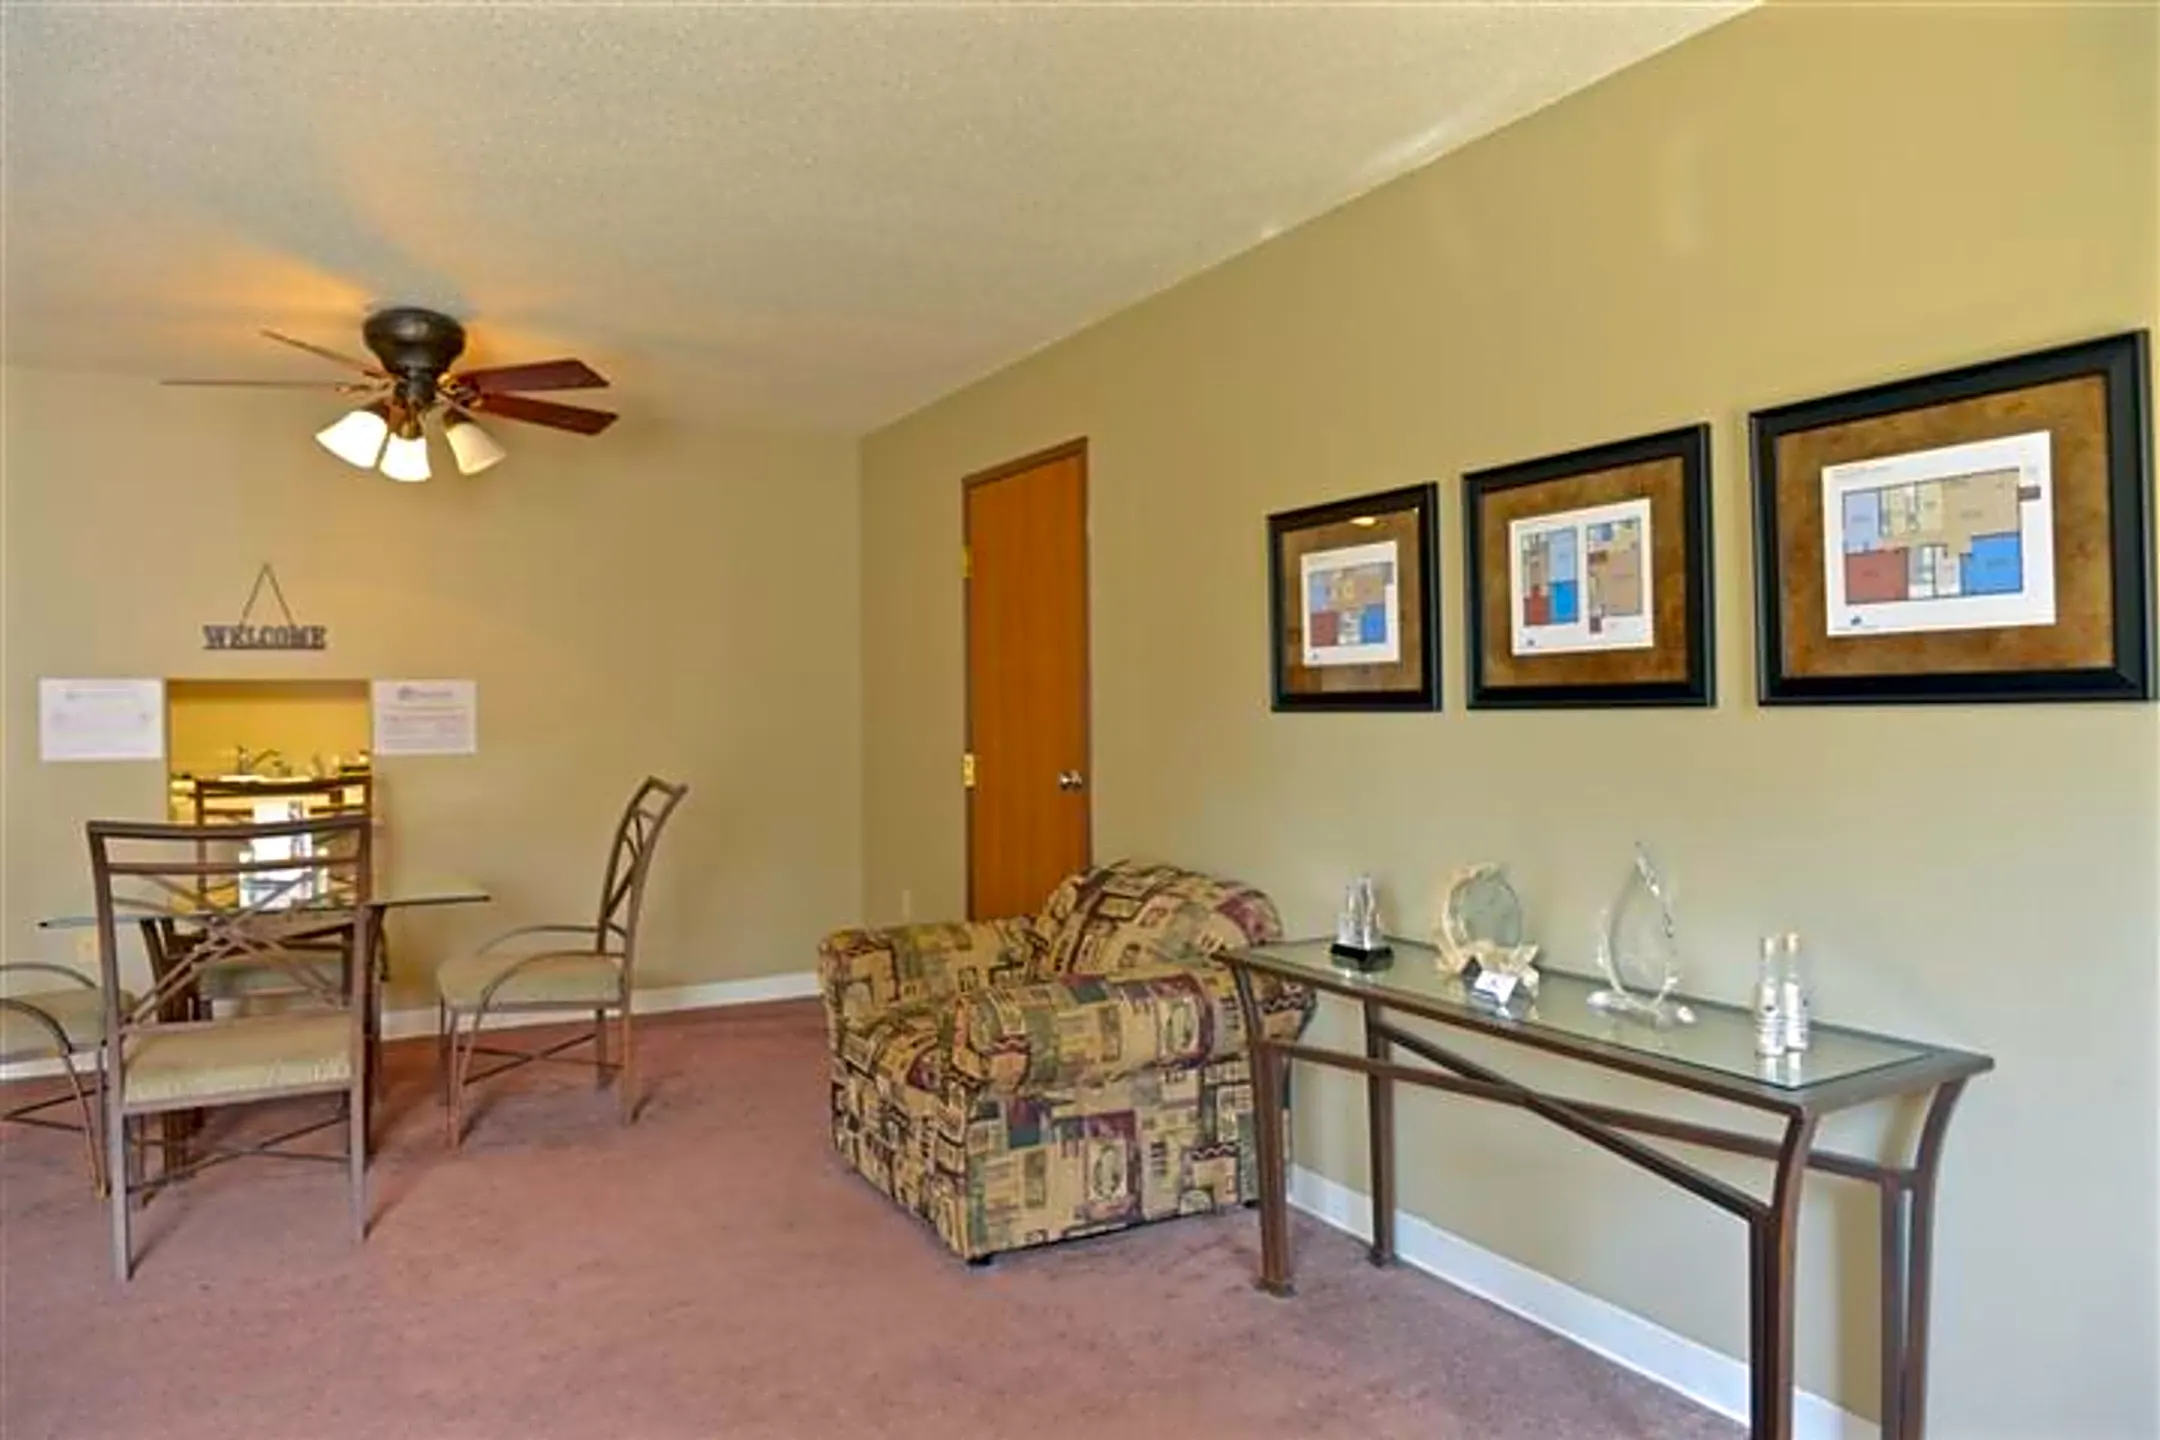 Dining Room - Woodsedge Apartments - Eau Claire, WI